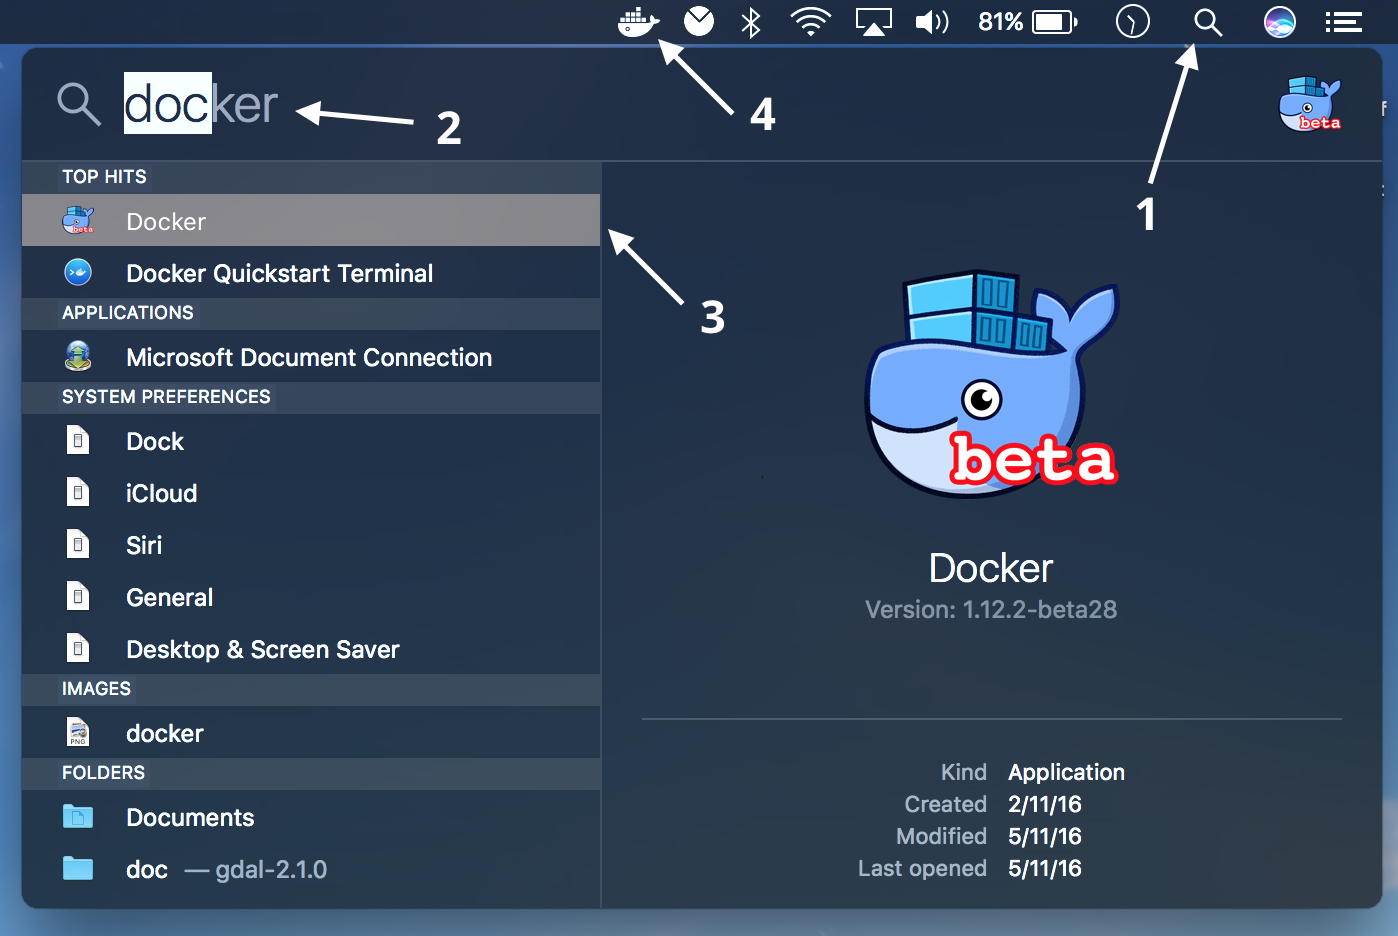 memory allocated to docker on mac